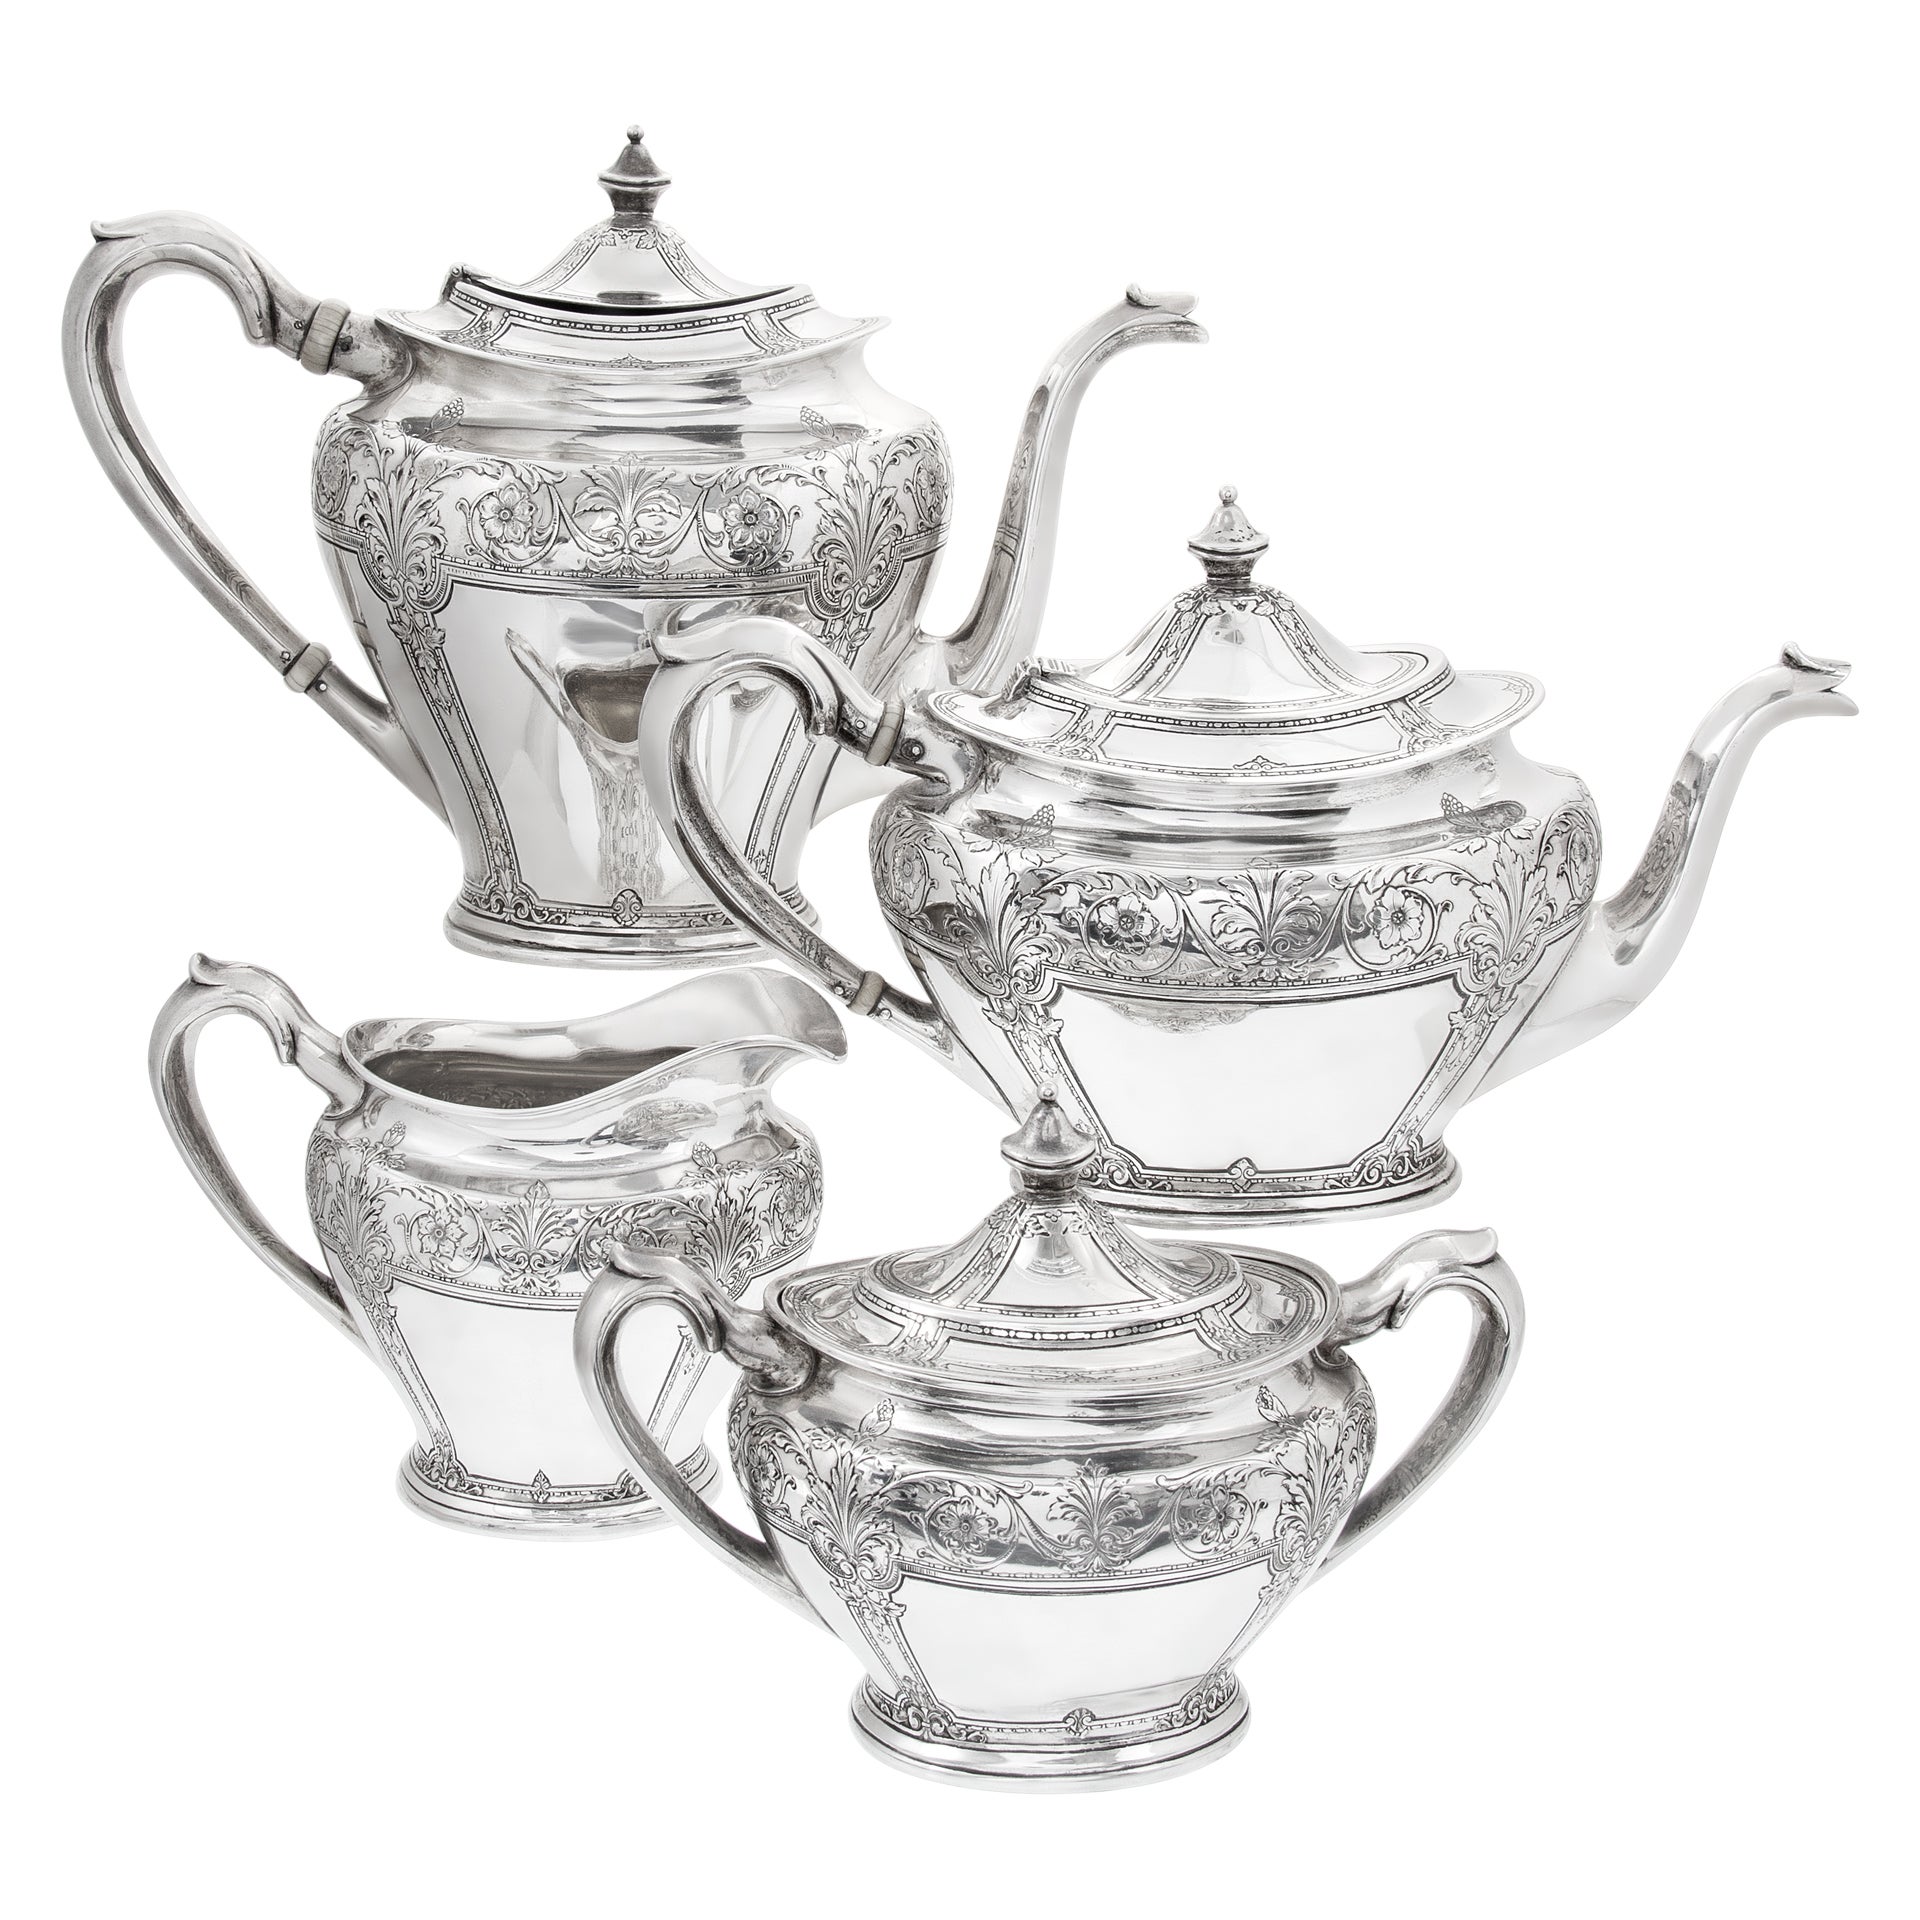 Victorian 4 Pieces Tea/Coffee Sterling Silver Set, by the Lebkuecher & Co For Sale